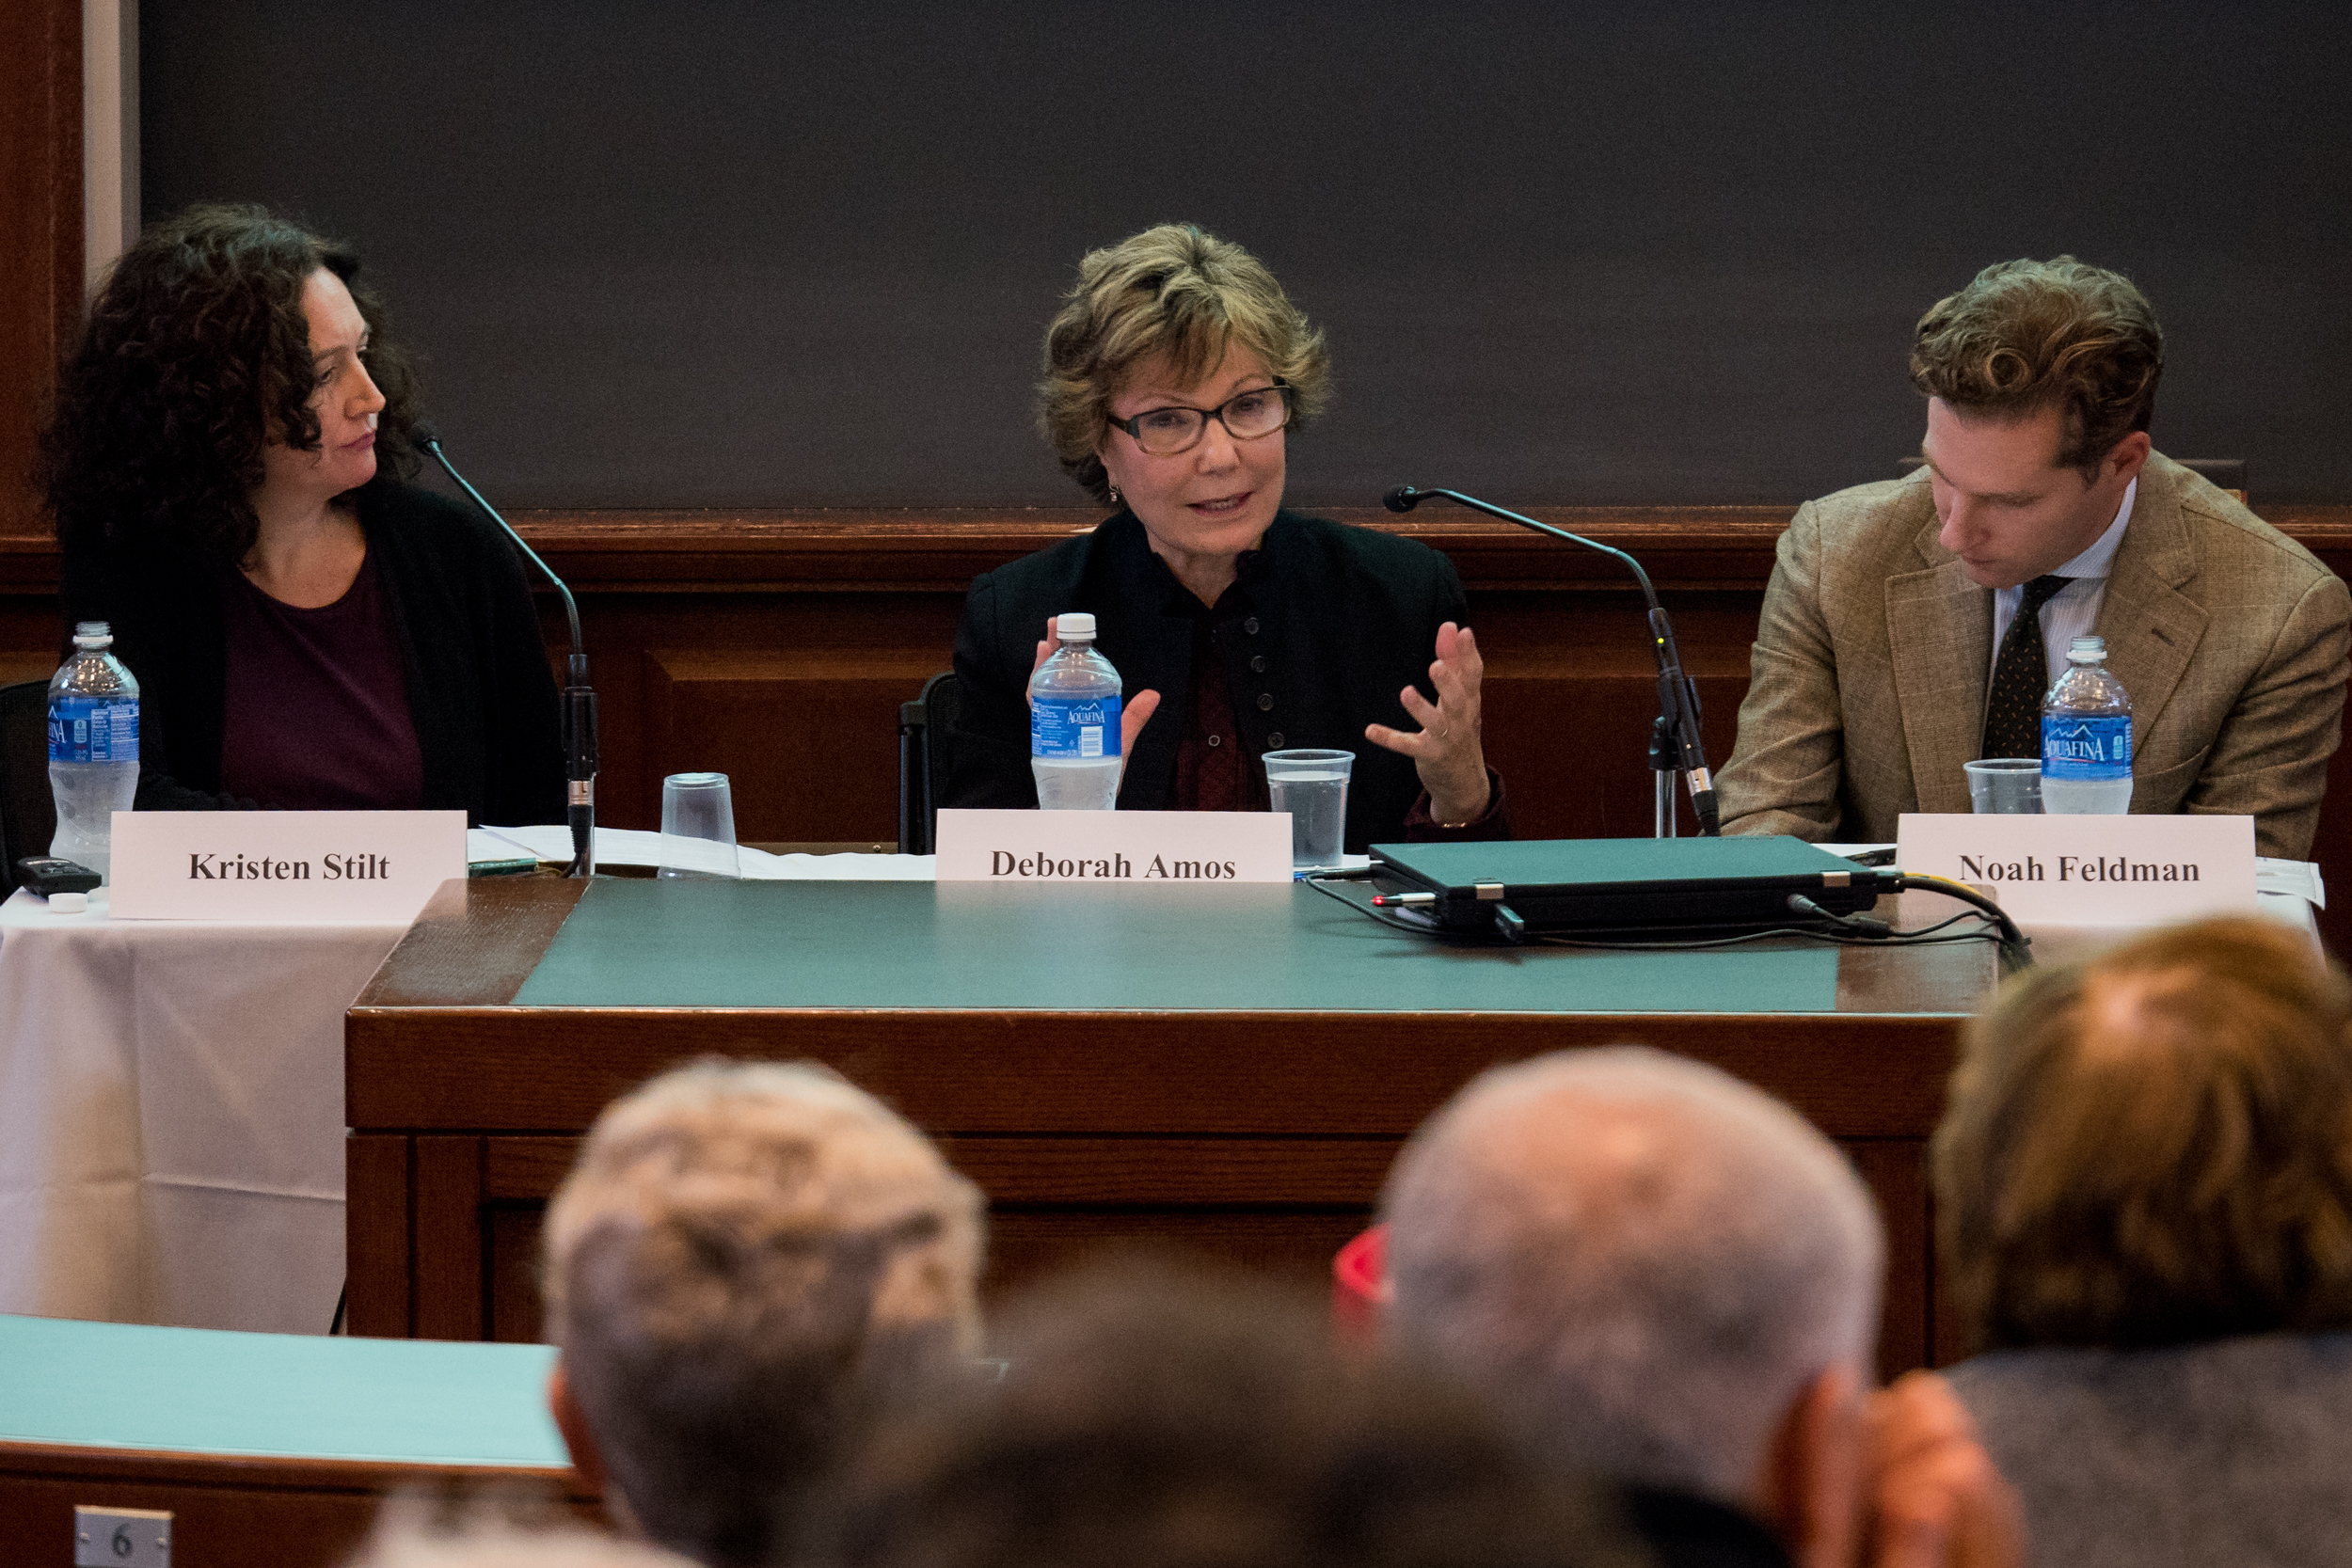 Deborah Amos, center, speaks about the danger posed by ISIS during a panel discussion with professors Kristen Stilt and Noah Feldman at Harvard Law School